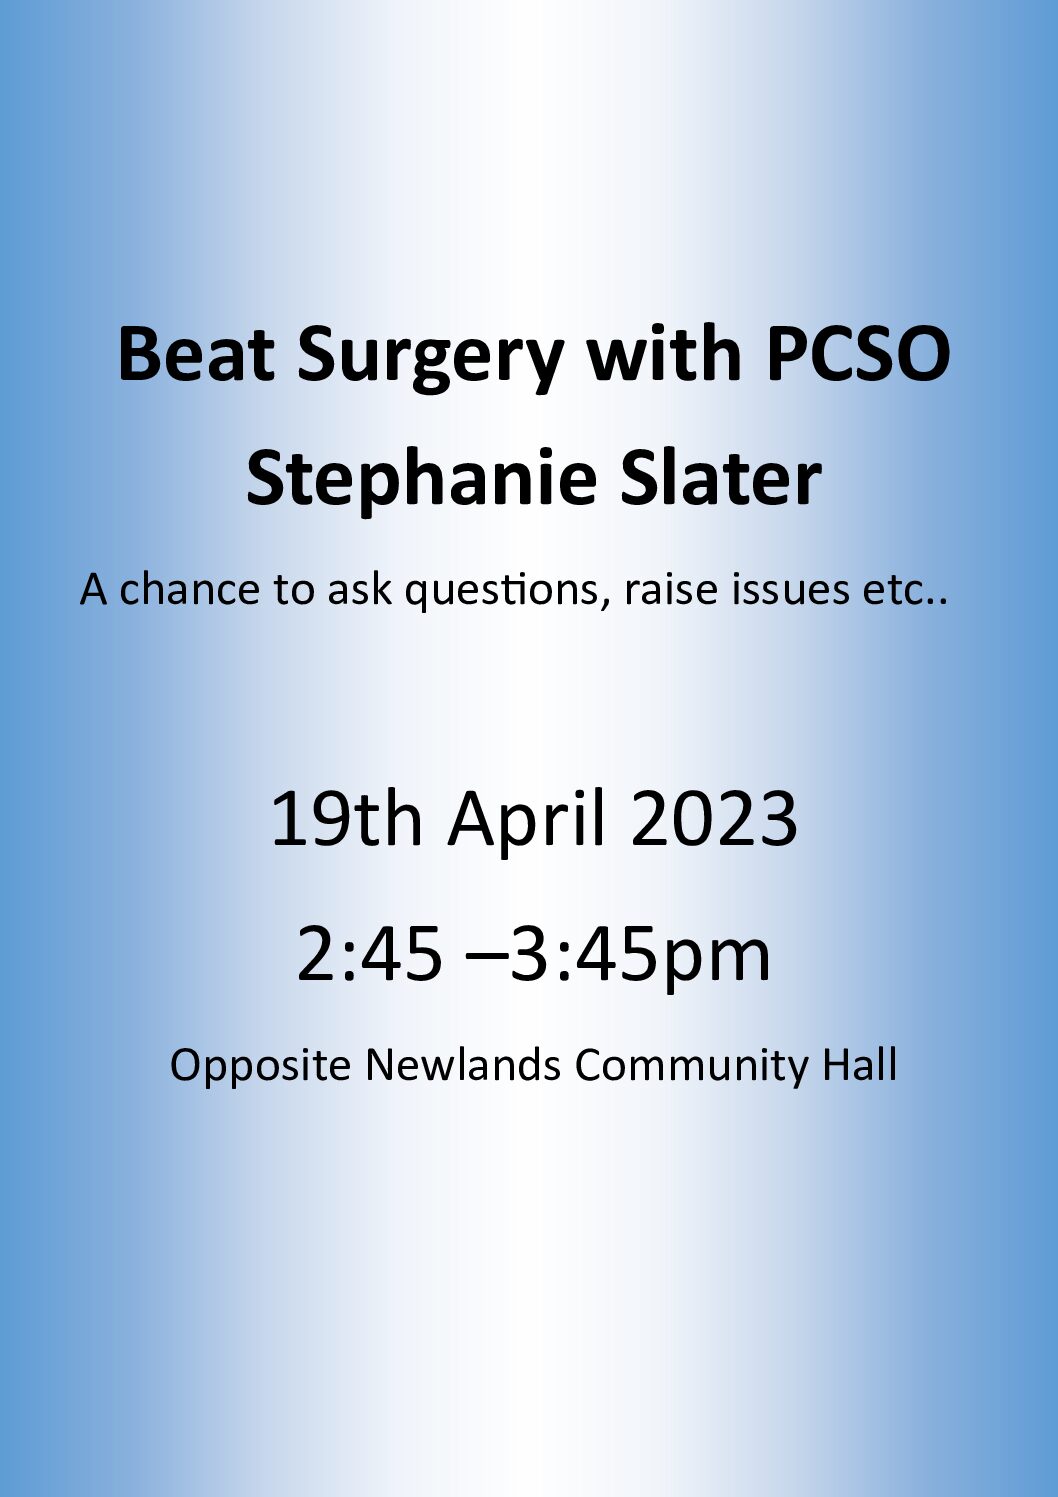 Beat Surgery with PCSO Stephanie Slater 19th April 2023